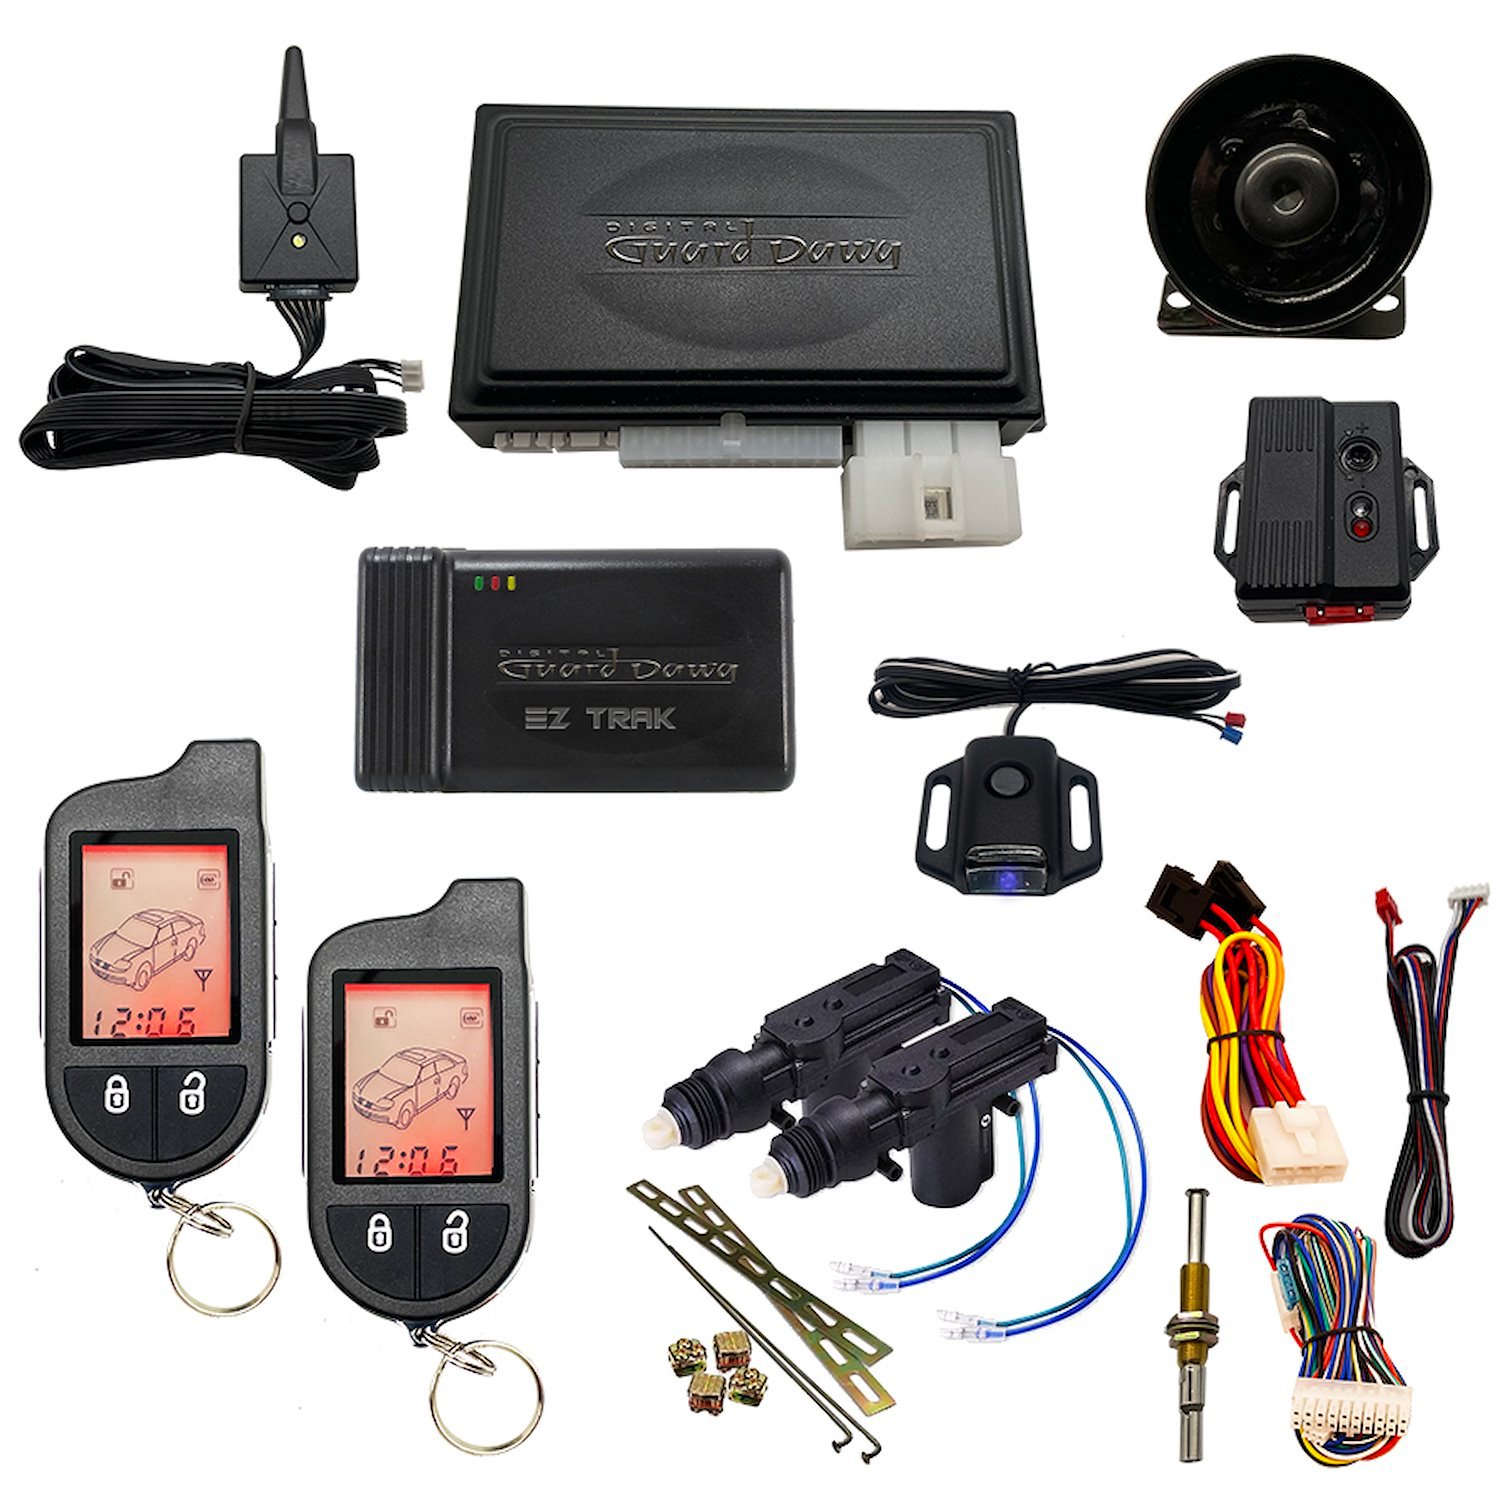 DGD-KY-ALM-RS2-2A-EZ Keyless Entry,Alarm System, and Remote Start, 2-Way, w/2-Door Actuator Kit and Smart Phone EZ-Tracking